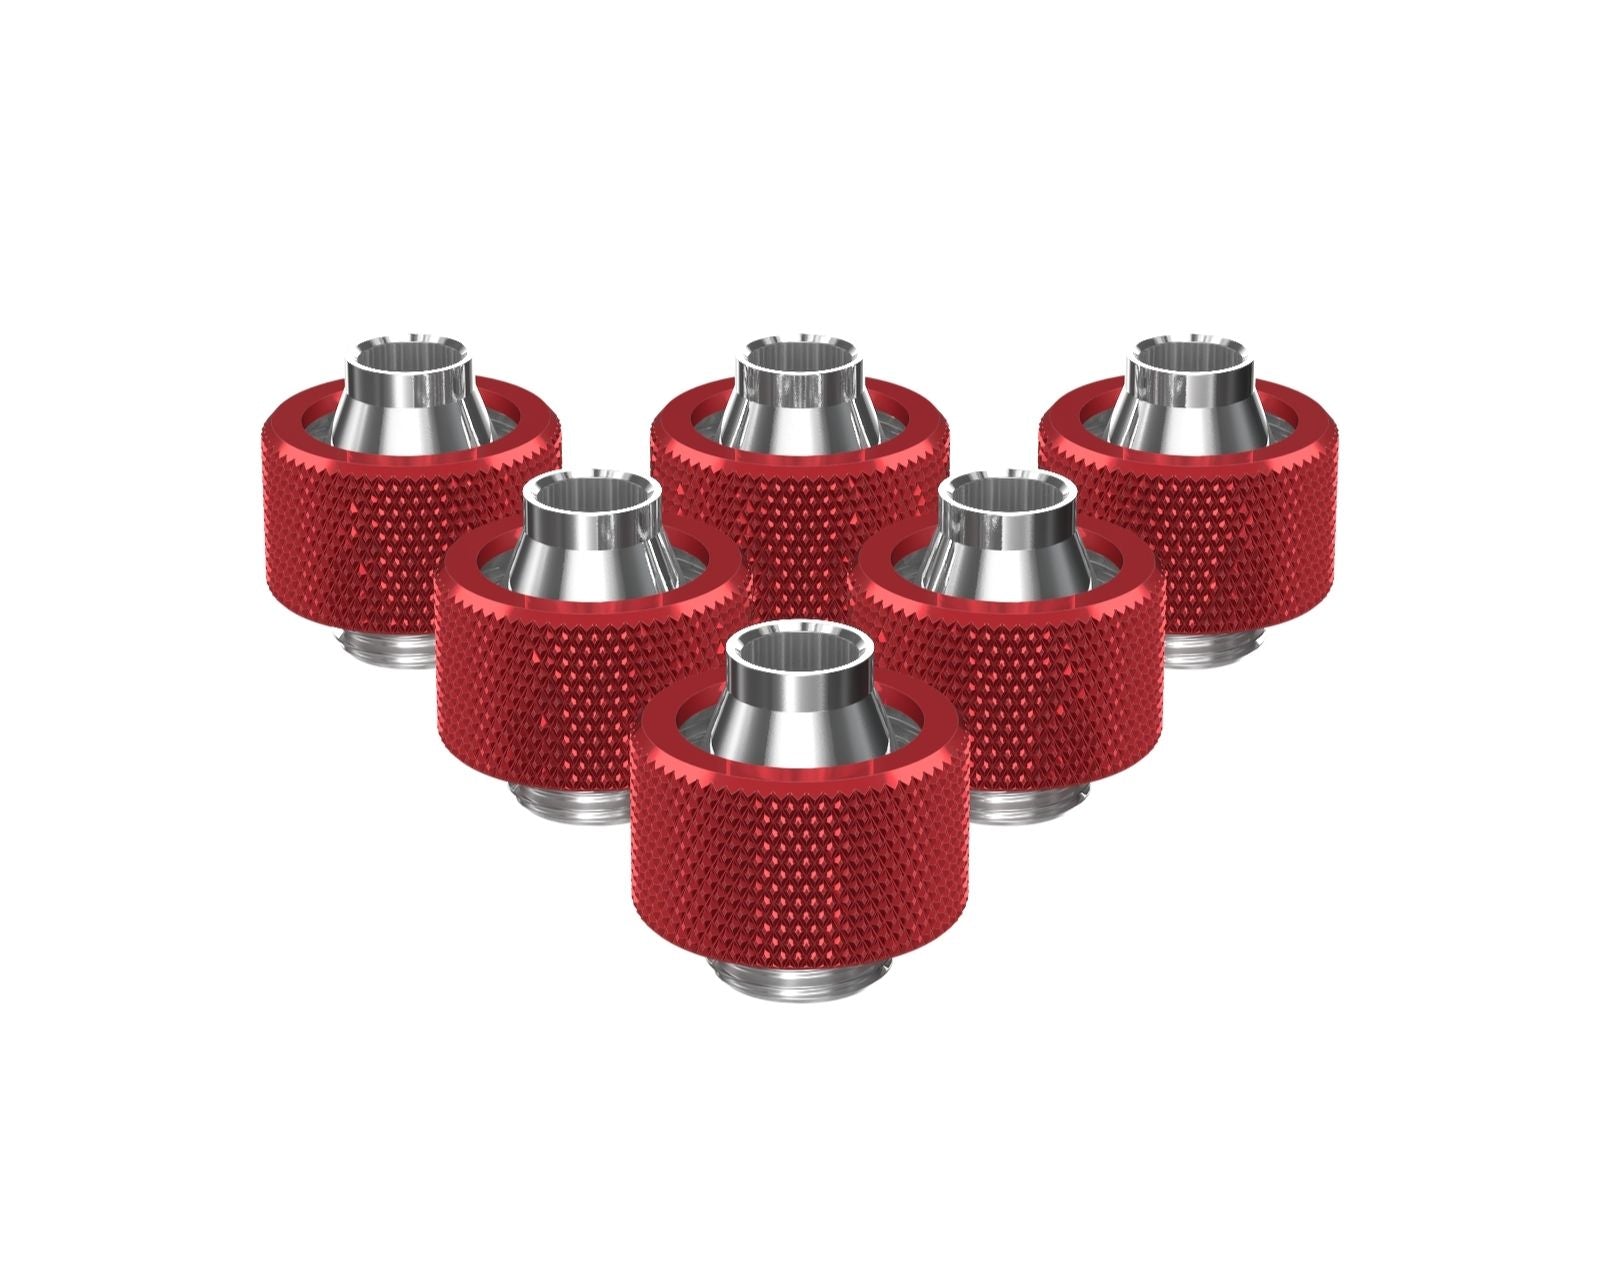 PrimoChill SecureFit SX - Premium Compression Fitting For 7/16in ID x 5/8in OD Flexible Tubing 6 Pack (F-SFSX758-6) - Available in 20+ Colors, Custom Watercooling Loop Ready - Candy Red